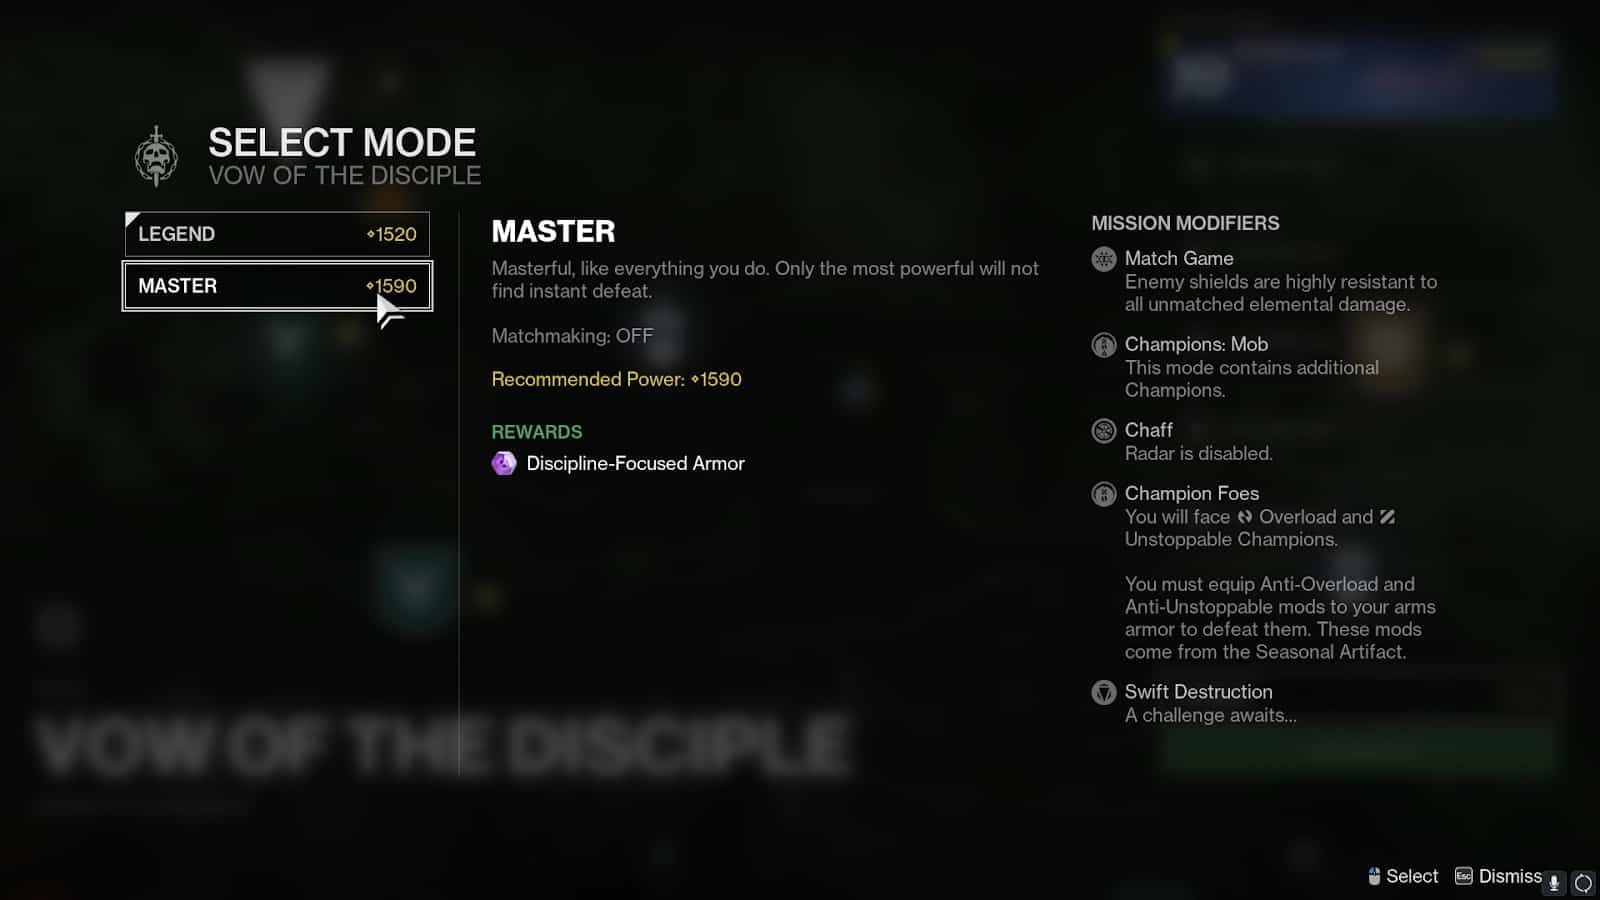 Why can't i make a vow of mastery?